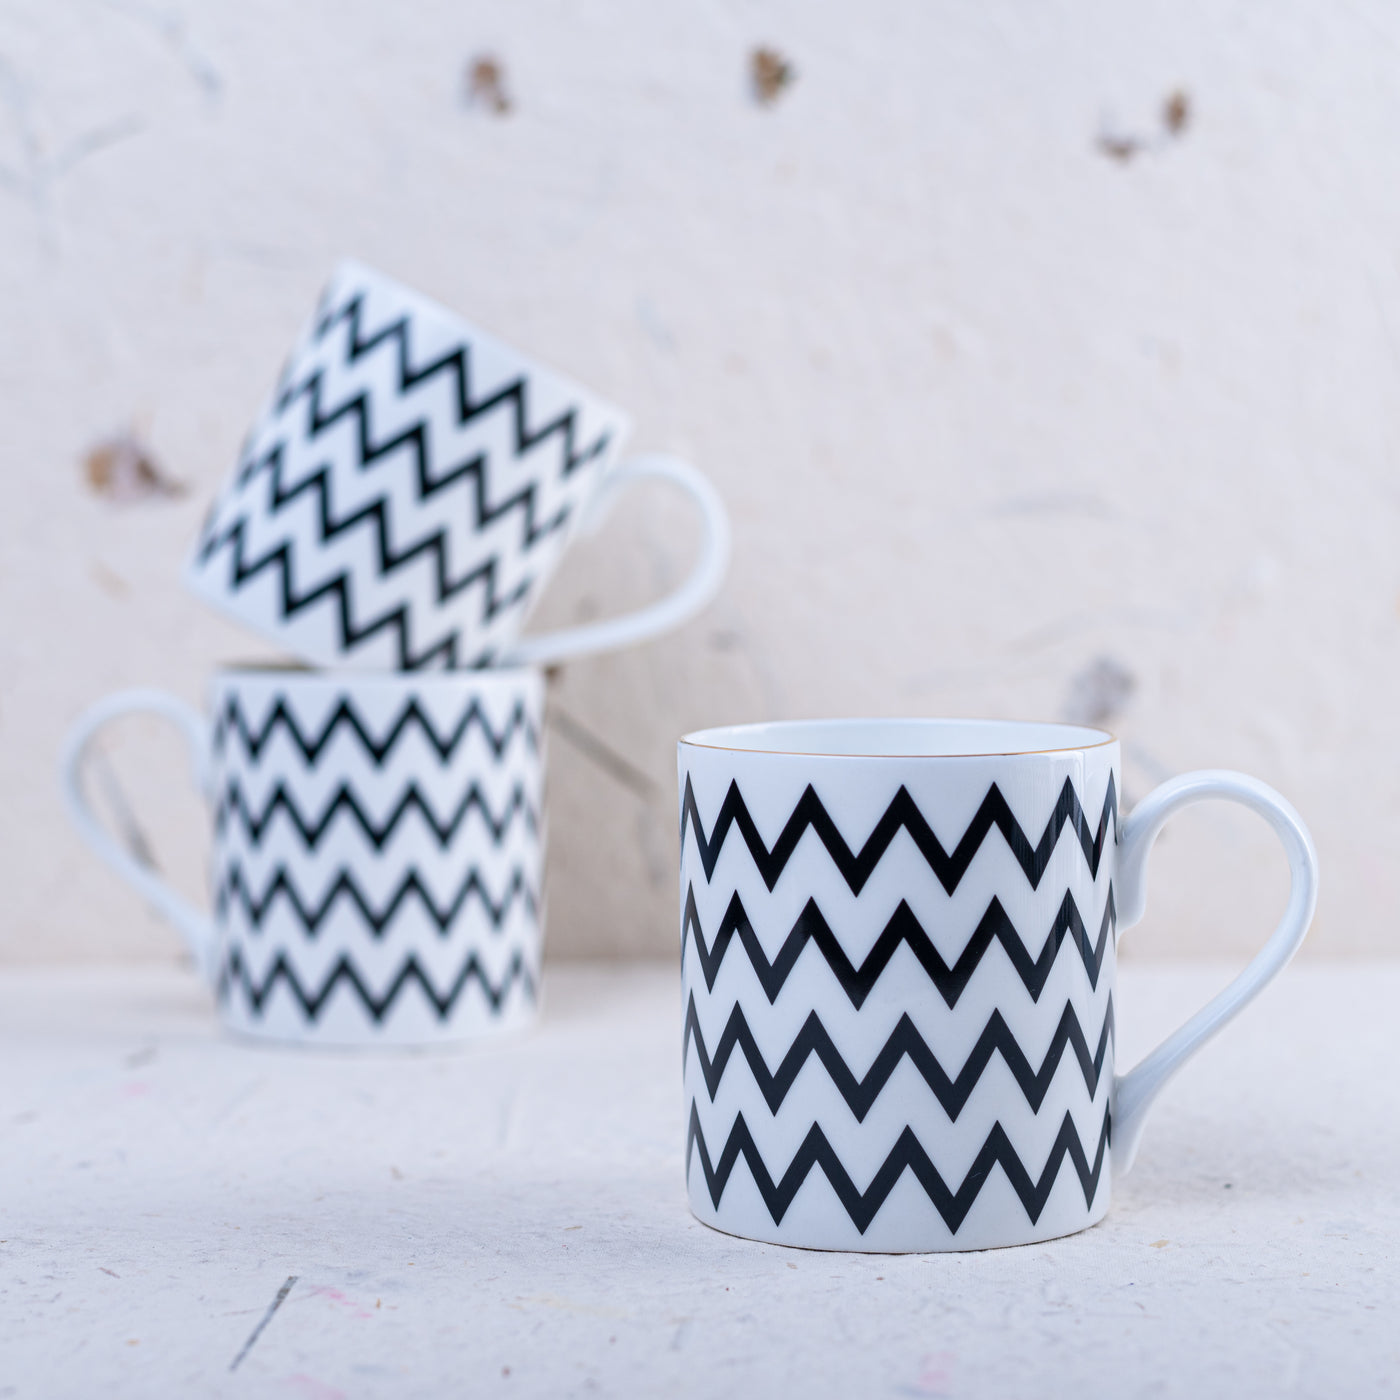 Spiked coffee mugs by Home 360